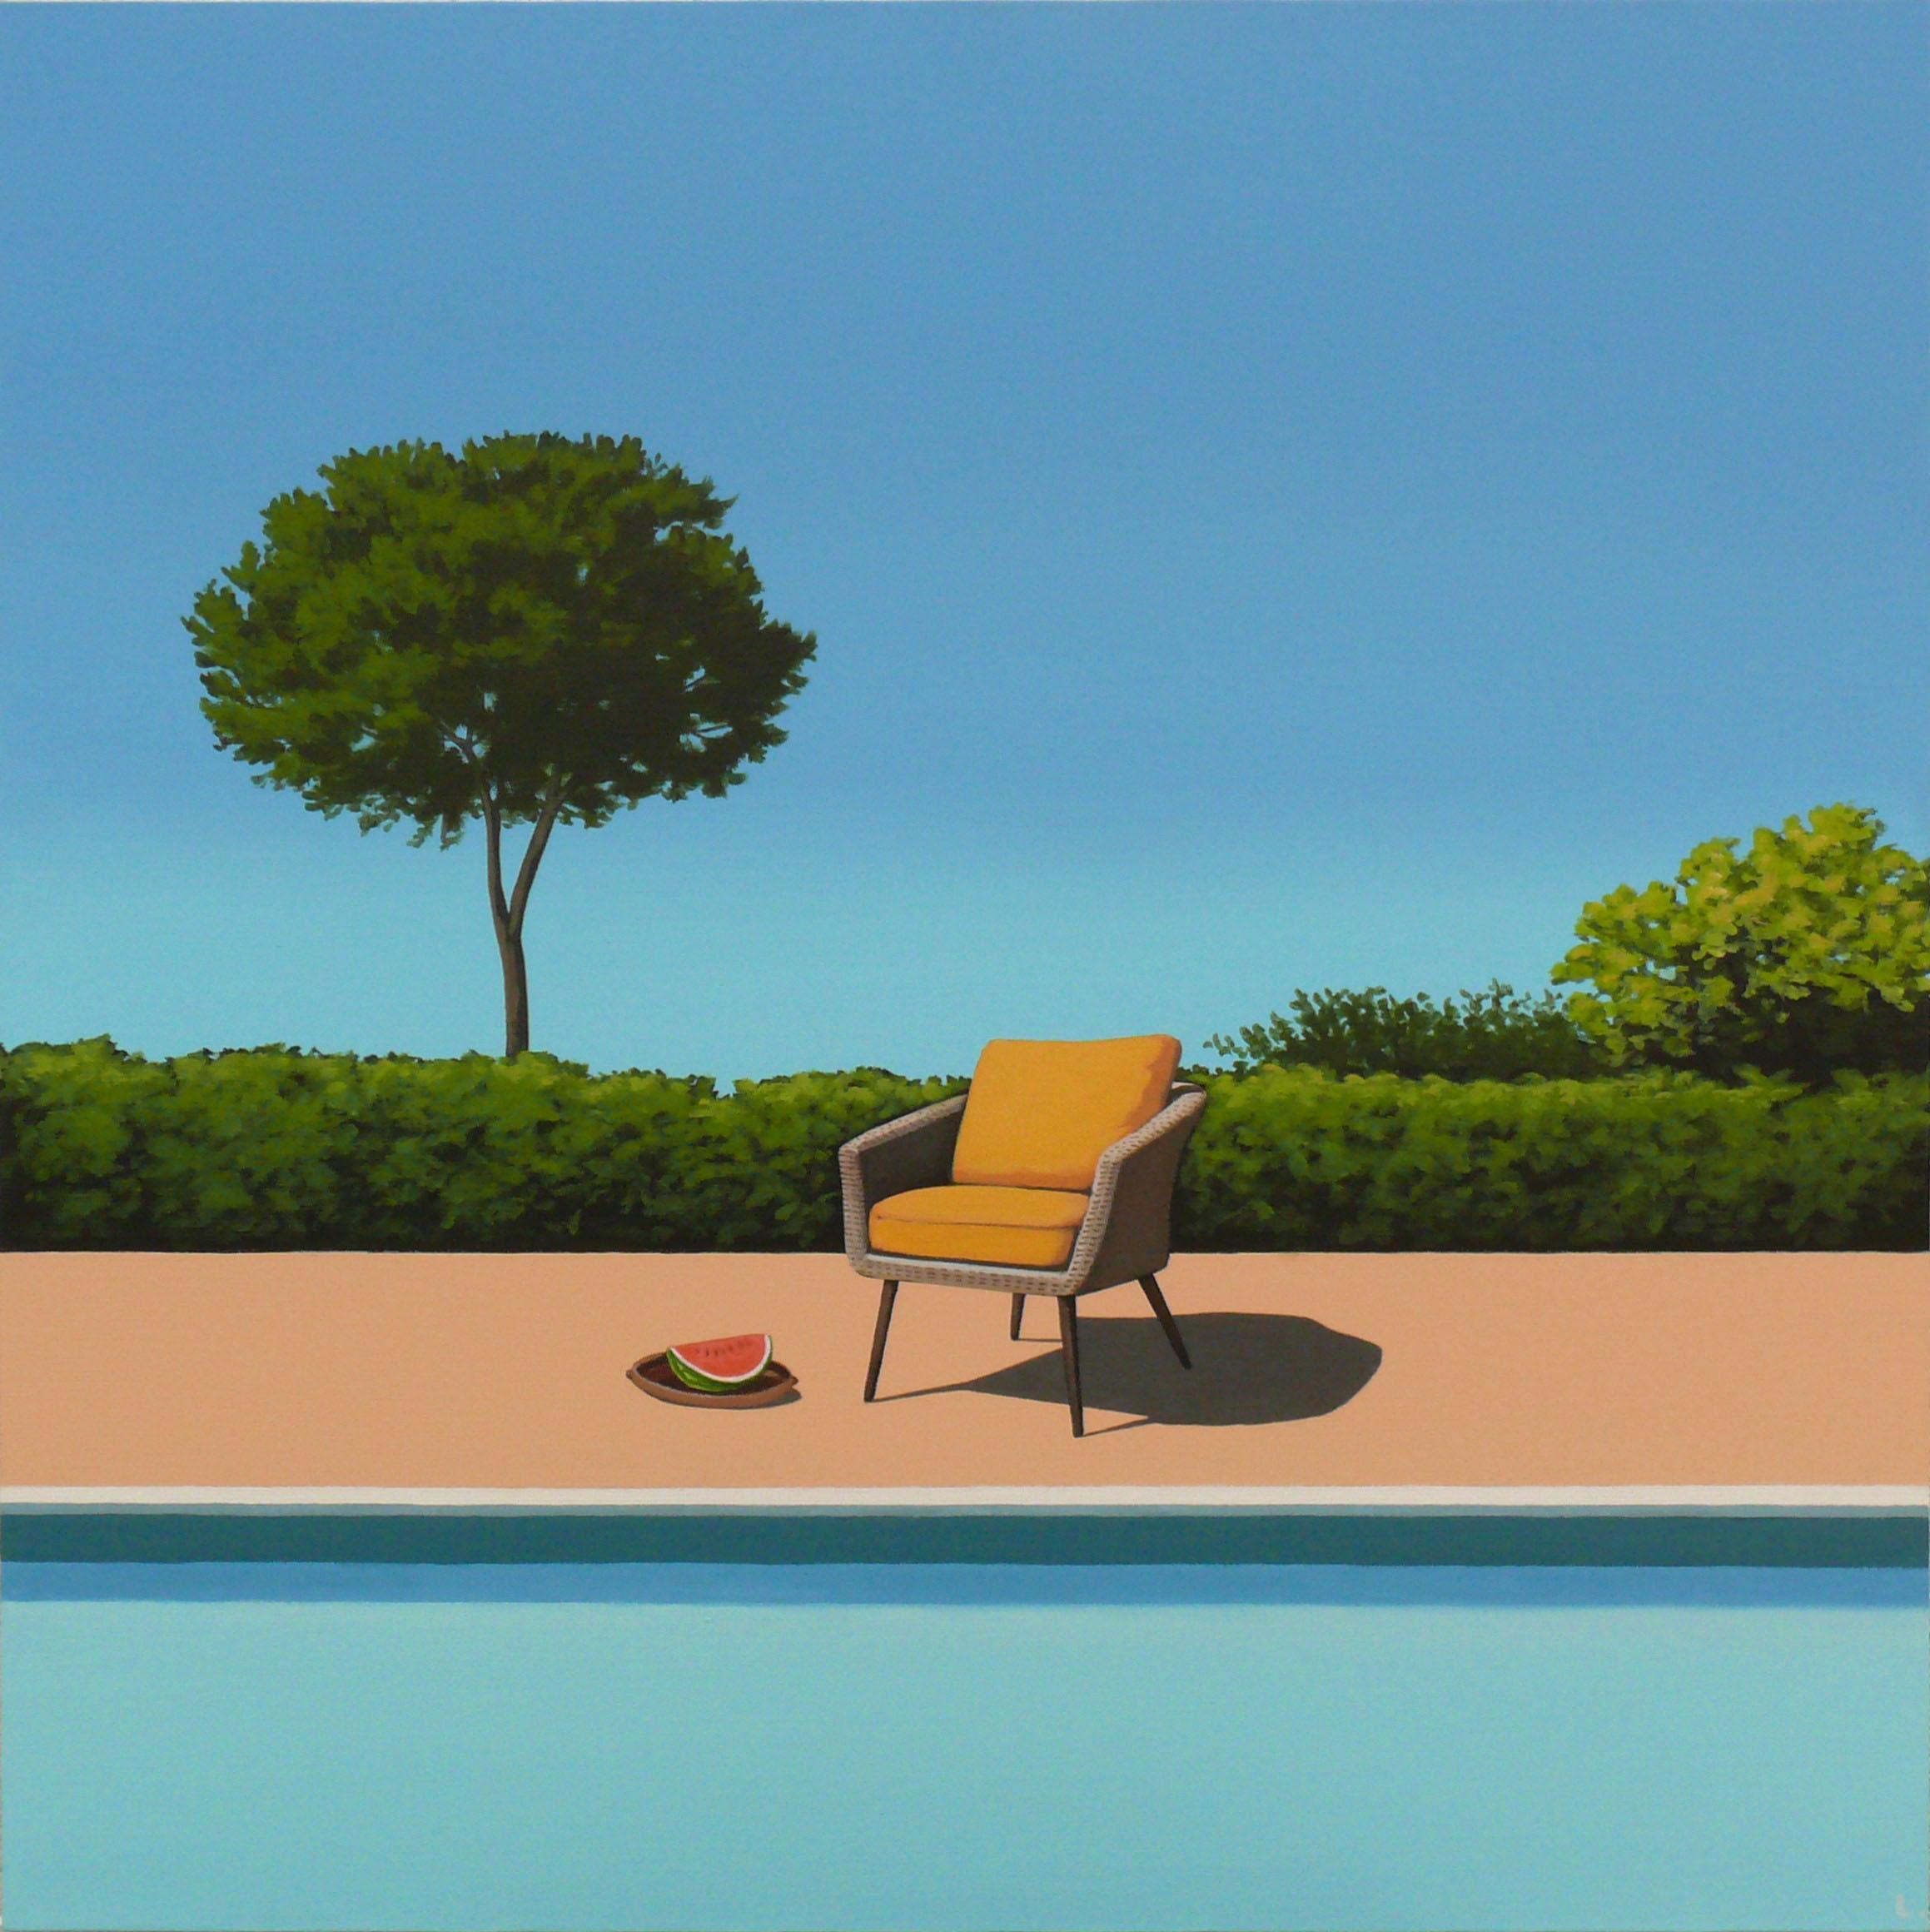 Watermelon by the pool - landscape painting 2